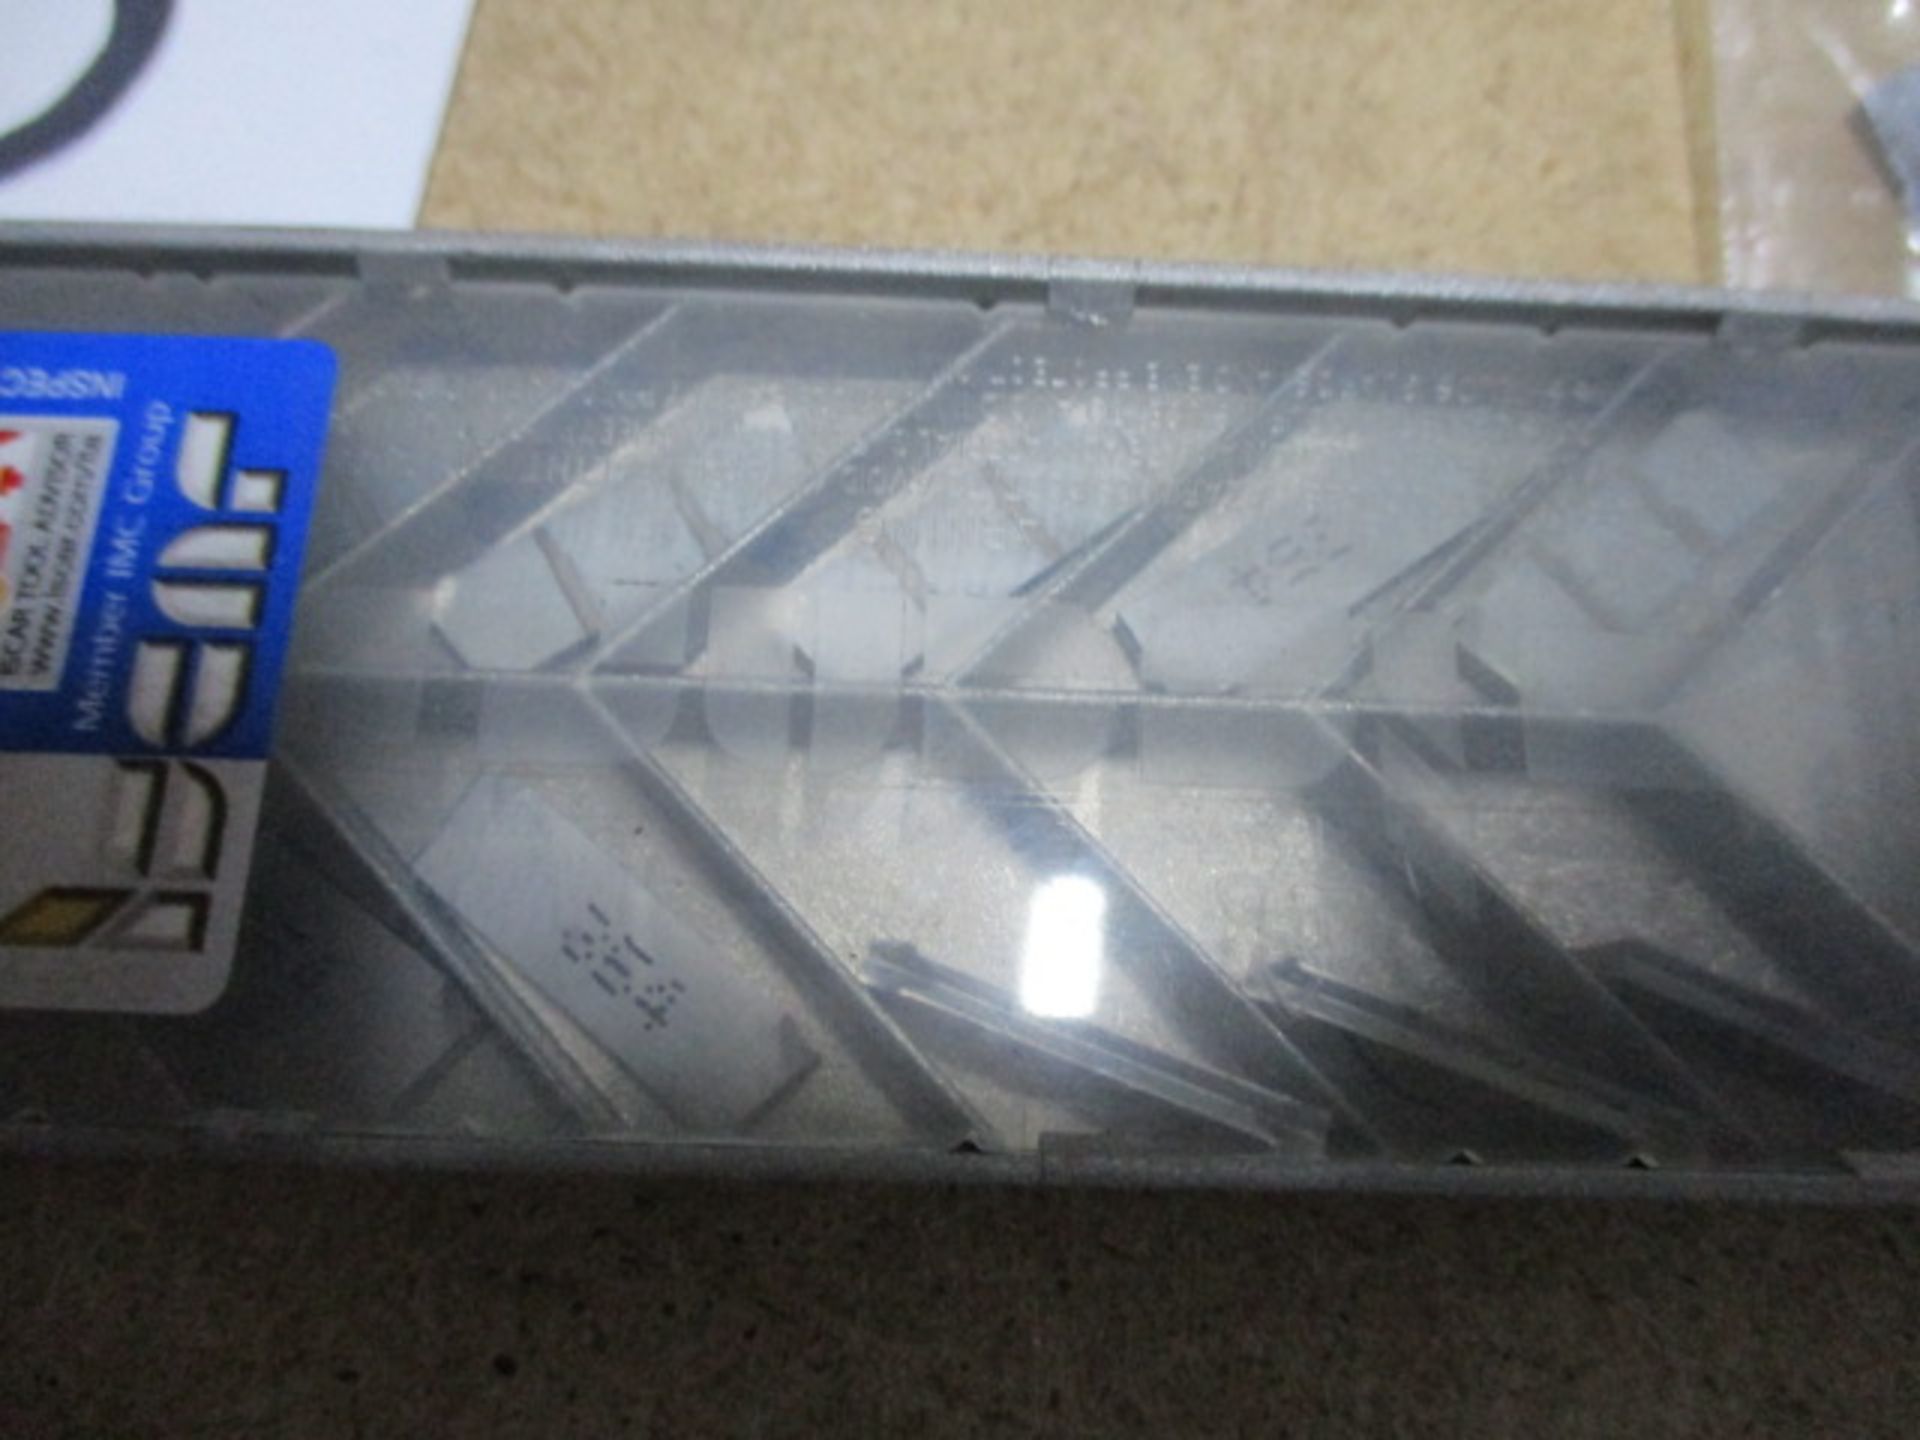 Indexable carbide inserts - Image 3 of 4